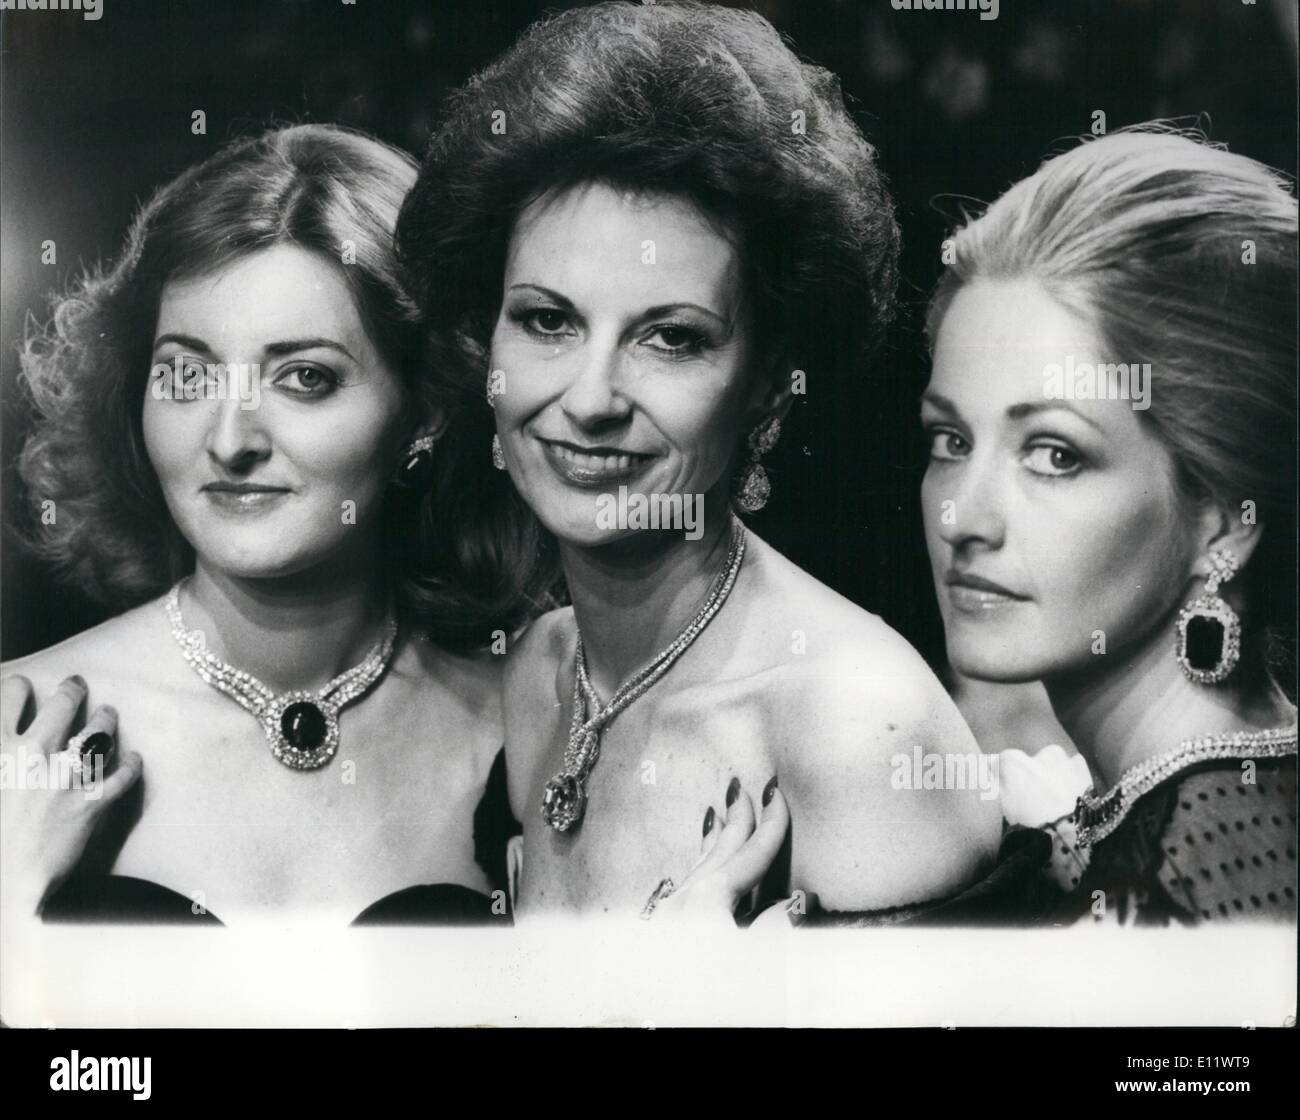 Jun. 06, 1980 - FAMILY MODEL FOR Mountbatten TRUST GALA. Lady Romsey whose husband is the heir to the Mountbatten tittle: Lord Mountbatten's grand - daughter, Lady Joanna Knatchbull, and his niece by marriage, the Marchioness of Milford Haren, modeled some of the most important pieces in the 5 million 1980 house of Gerard collection to be shown at the Charity Gala in aid of the Mountbatten Memorial trust, at Annabel's club, Hay's Mews, London, this evening, and also tomorrow ad Wednesday. The Gala which is a sell-out should raise nearly 0,000 Stock Photo